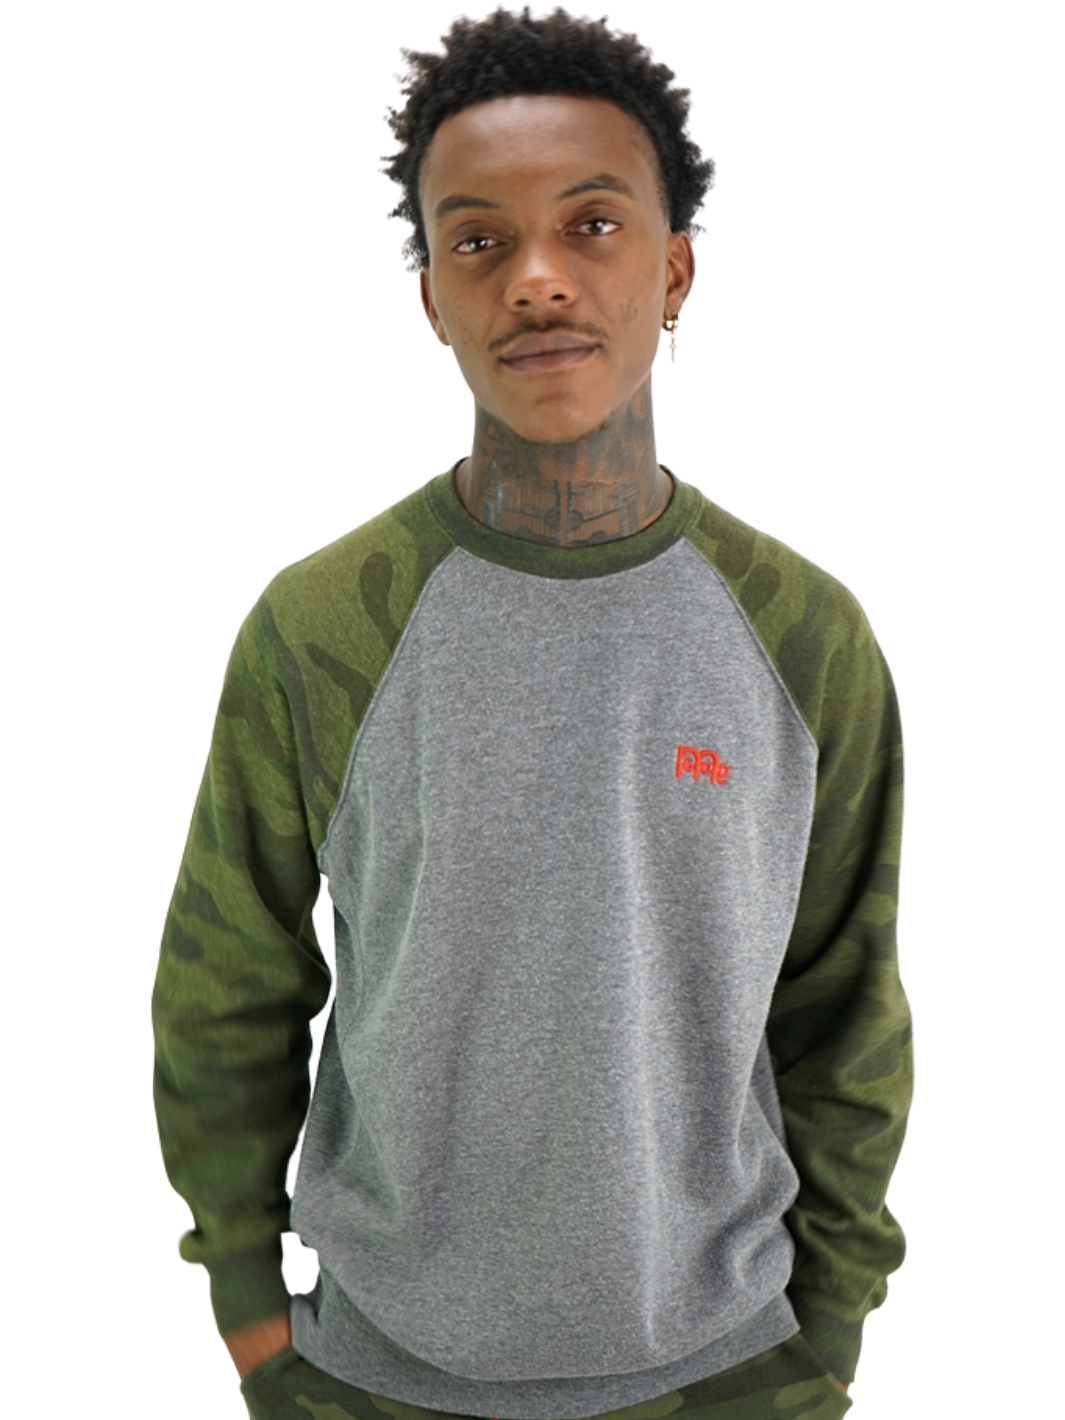 GODinme Crewneck Sweater; luxurious comfort, Grey with Green Camouflage raglan sleeves and embroidered GODinme logo at left chest